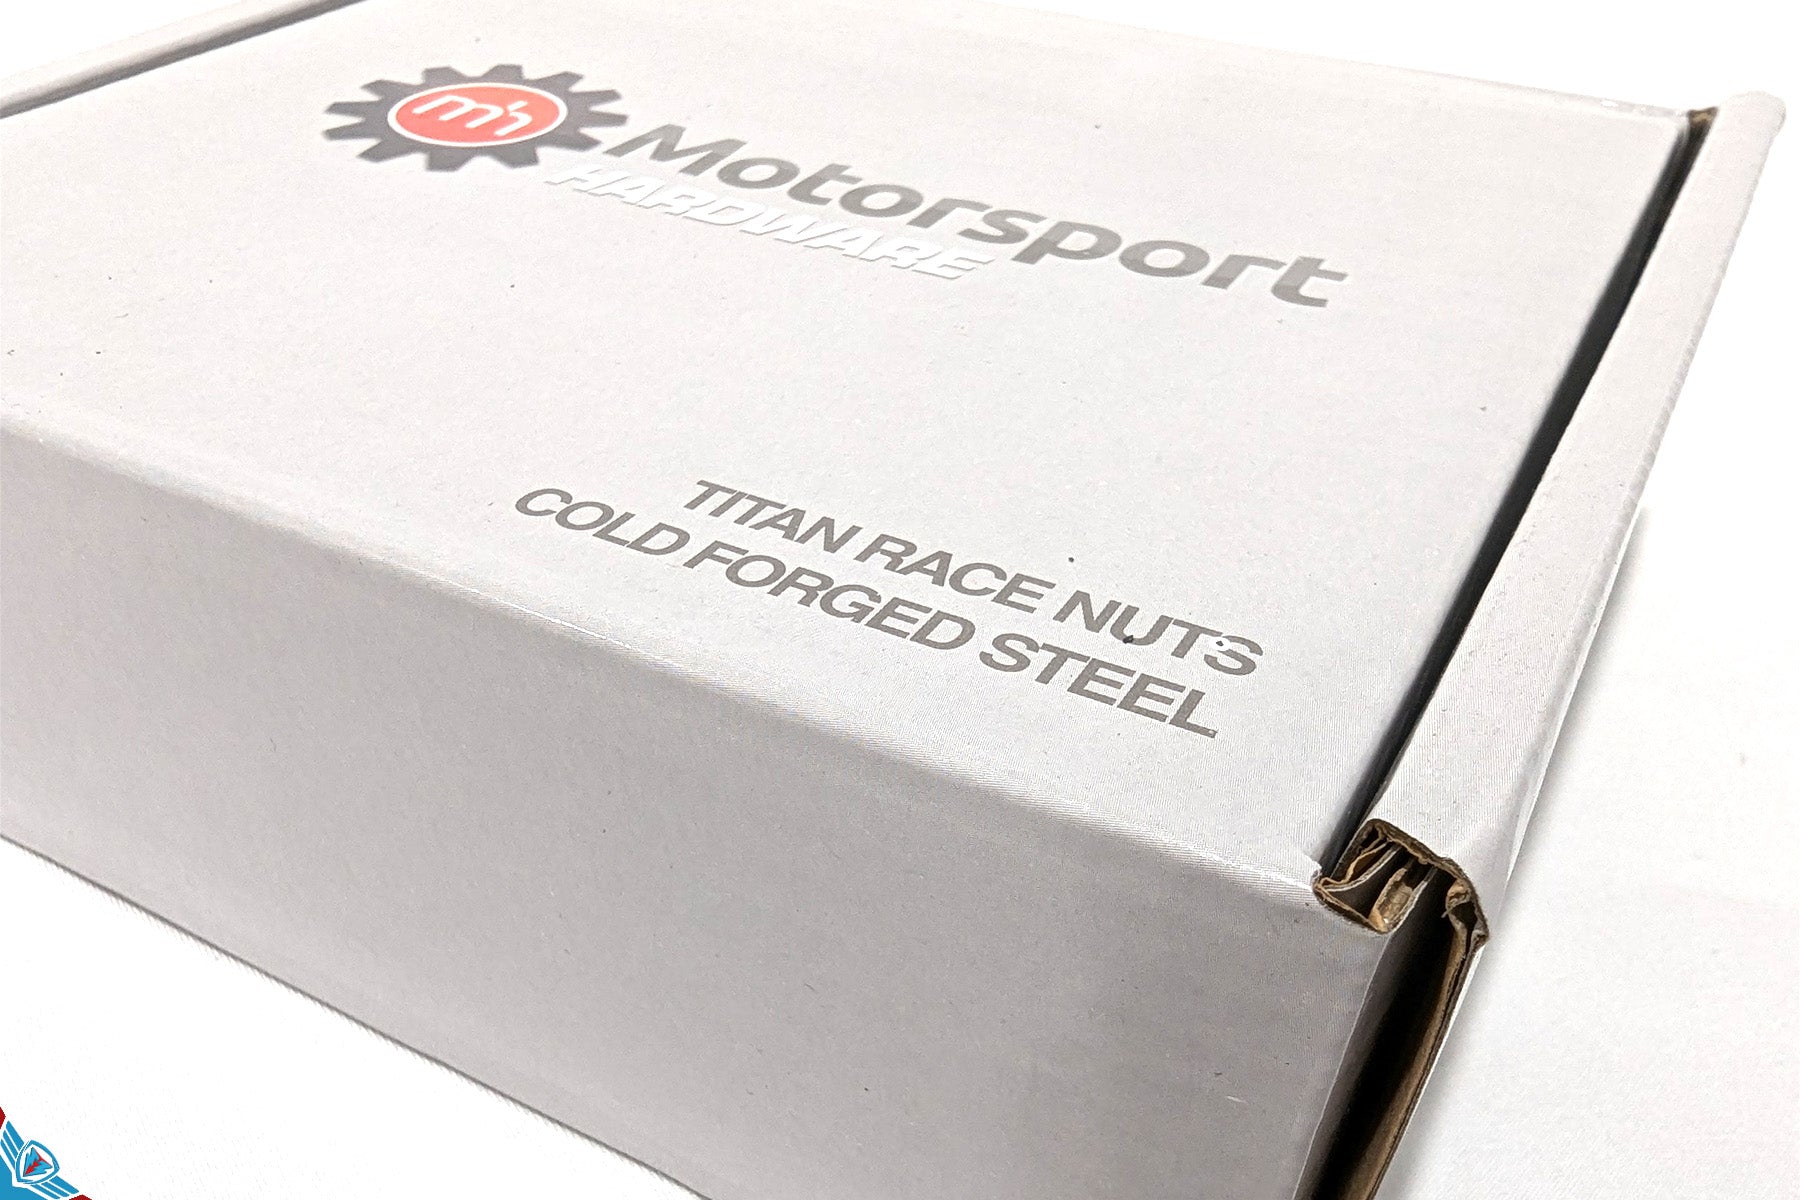 Motorsport Hardware 19mm MH Titan High Torque Forged Steel Race nuts